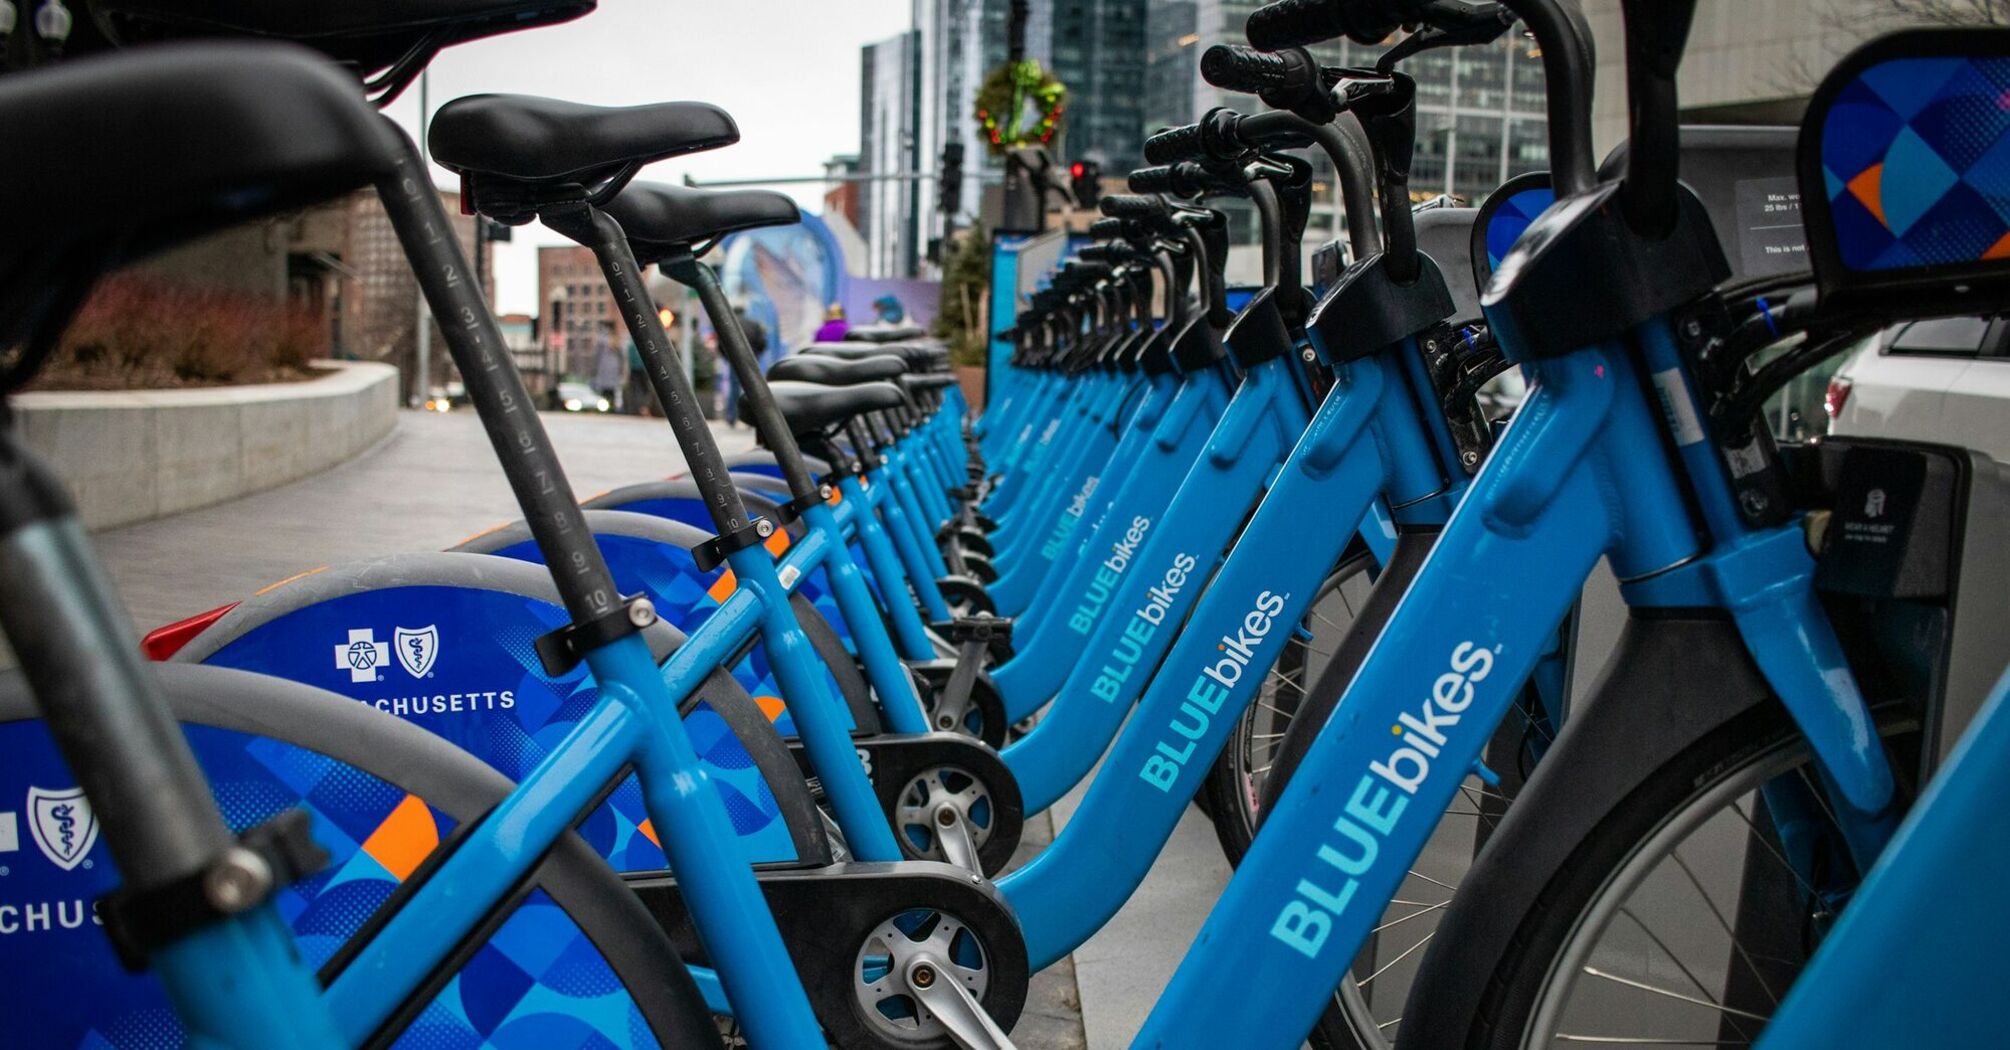 Row of blue Blue Bikes docked at a station in Boston, Massachusetts